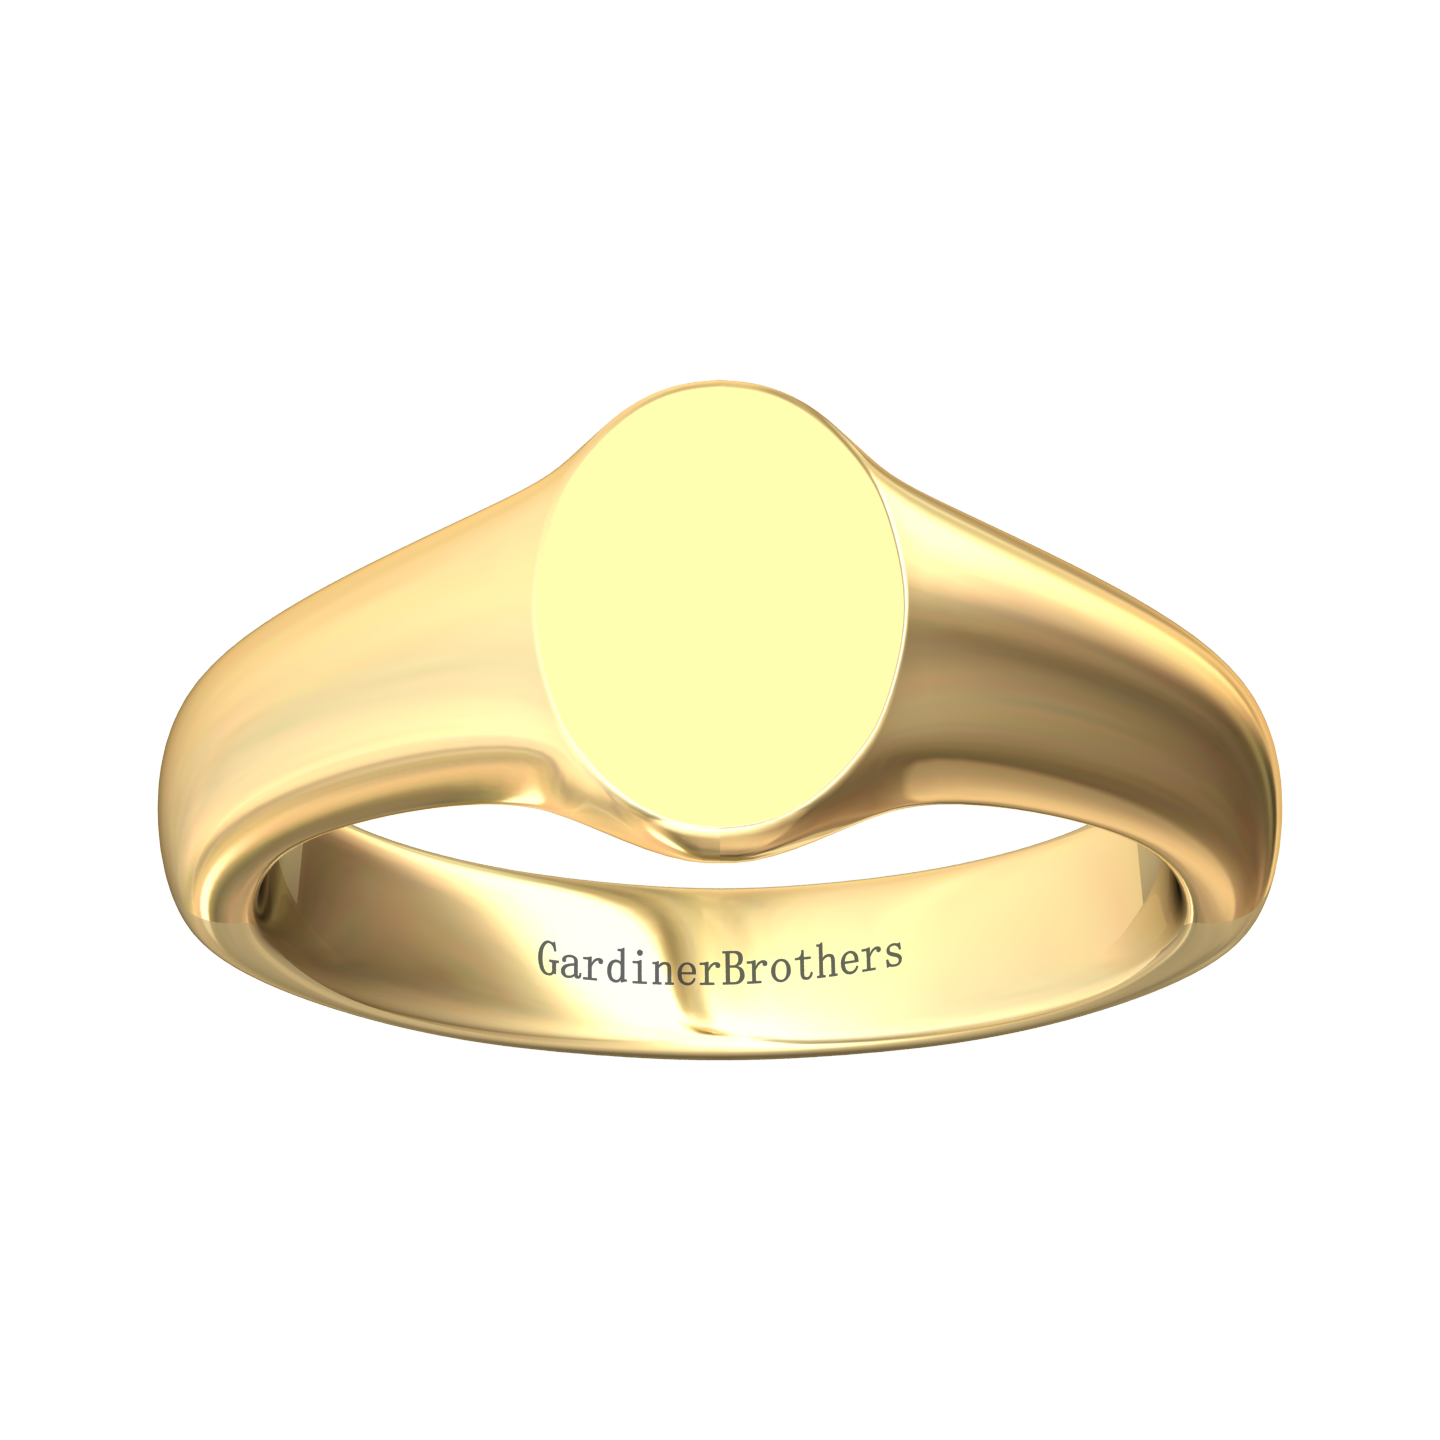 Oval Signet Ring 9x7mm  Gardiner Brothers   